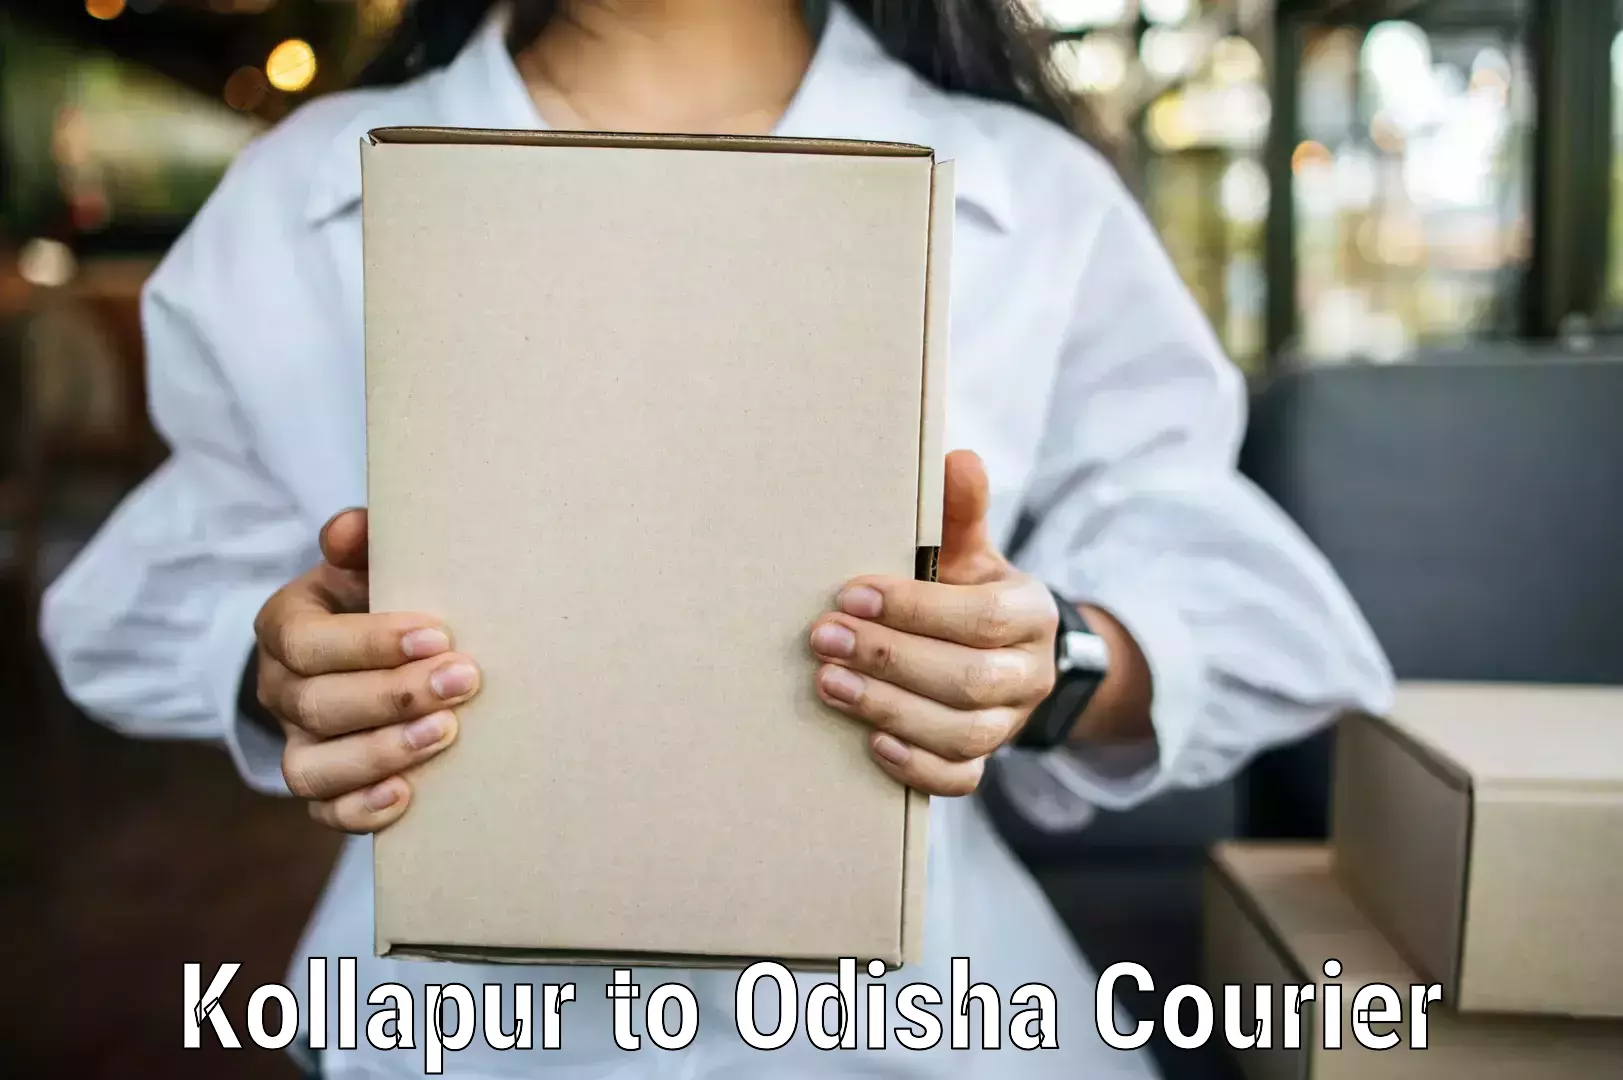 On-call courier service Kollapur to Kendrapara